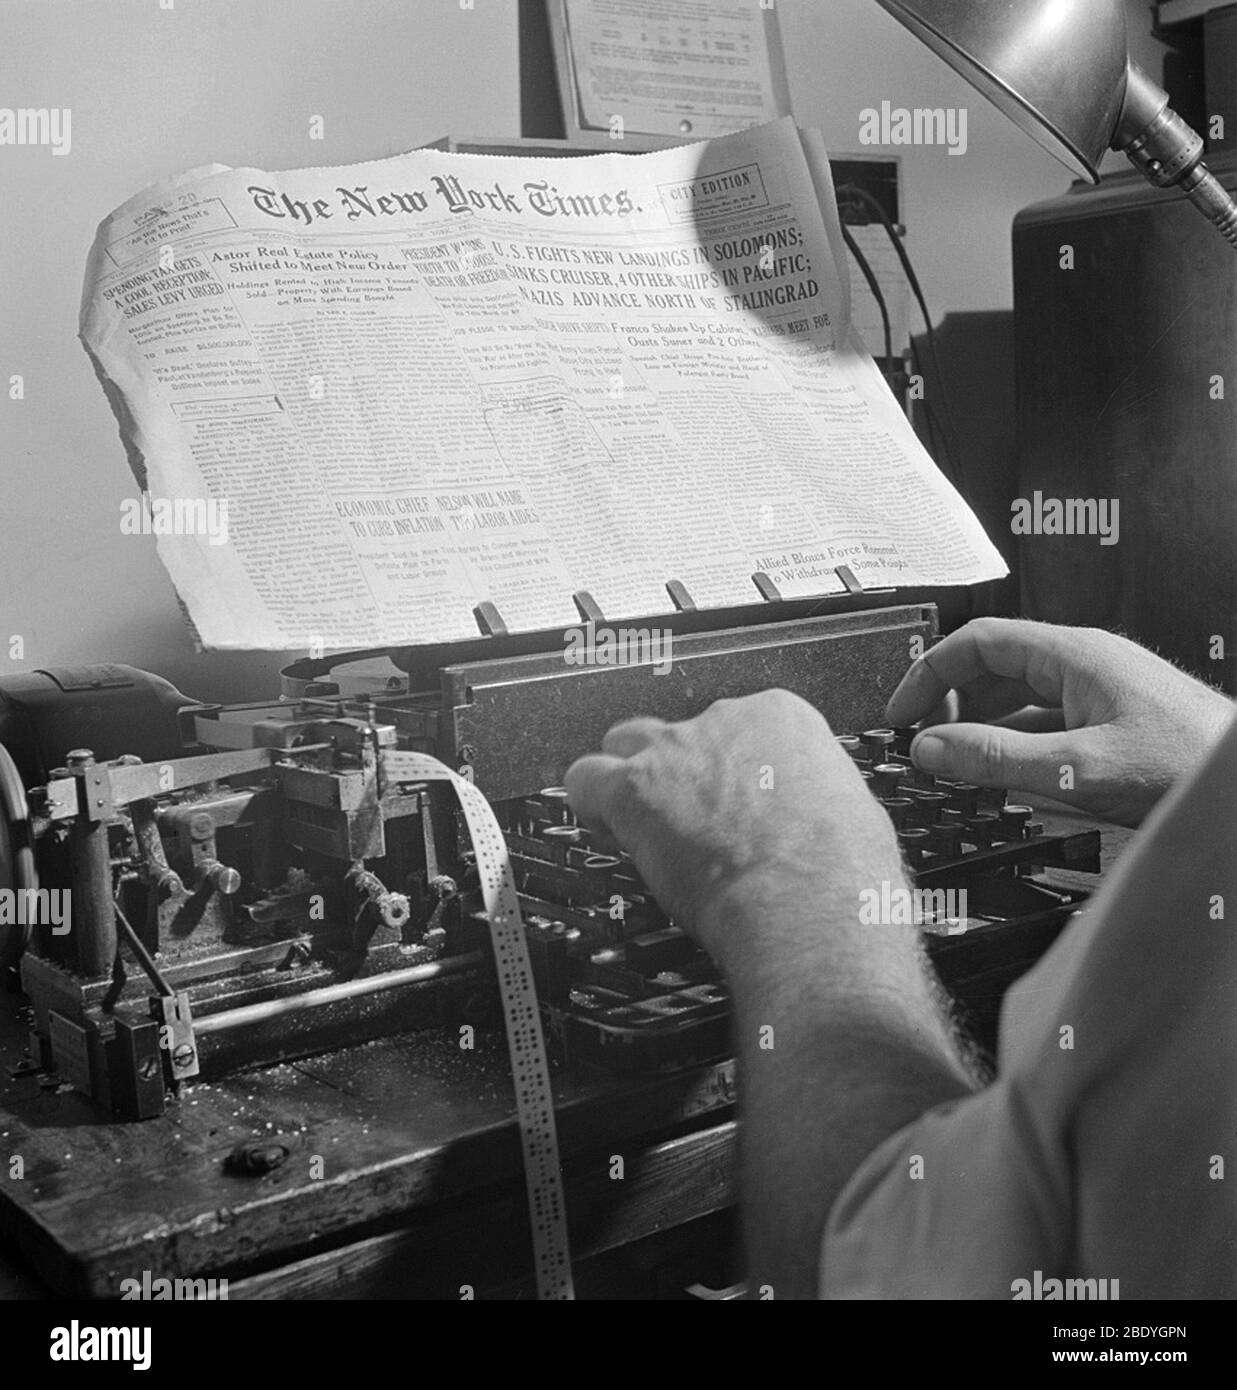 Times News Sent By Morse Code to Ships, 1942 Stock Photo